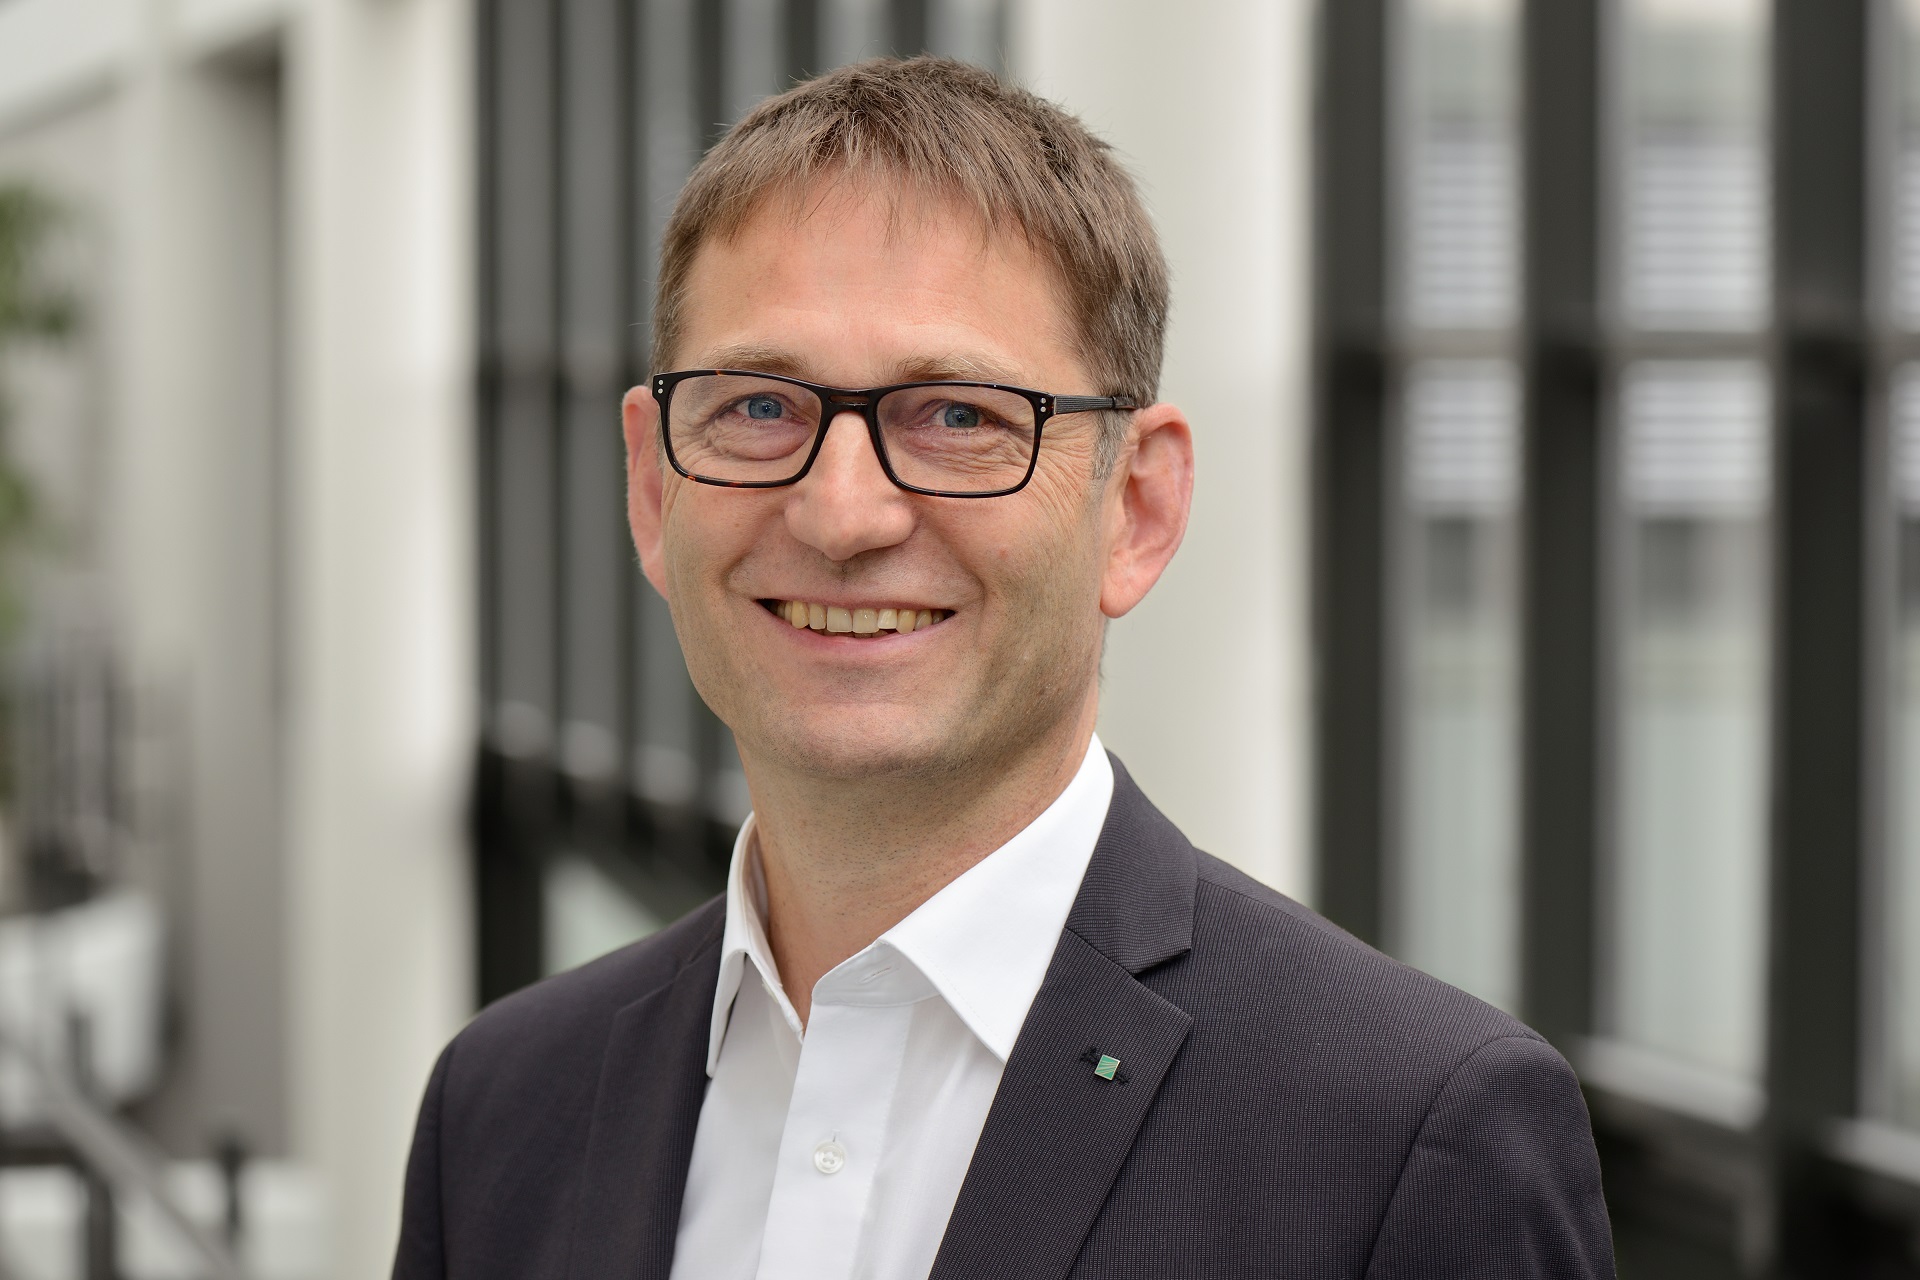 Dr.-Ing. Alexander Olowinsky, Group Leader of Micro Joining at Fraunhofer ILT: “We plan to establish a virtual platform to promote the exchange of know-how."